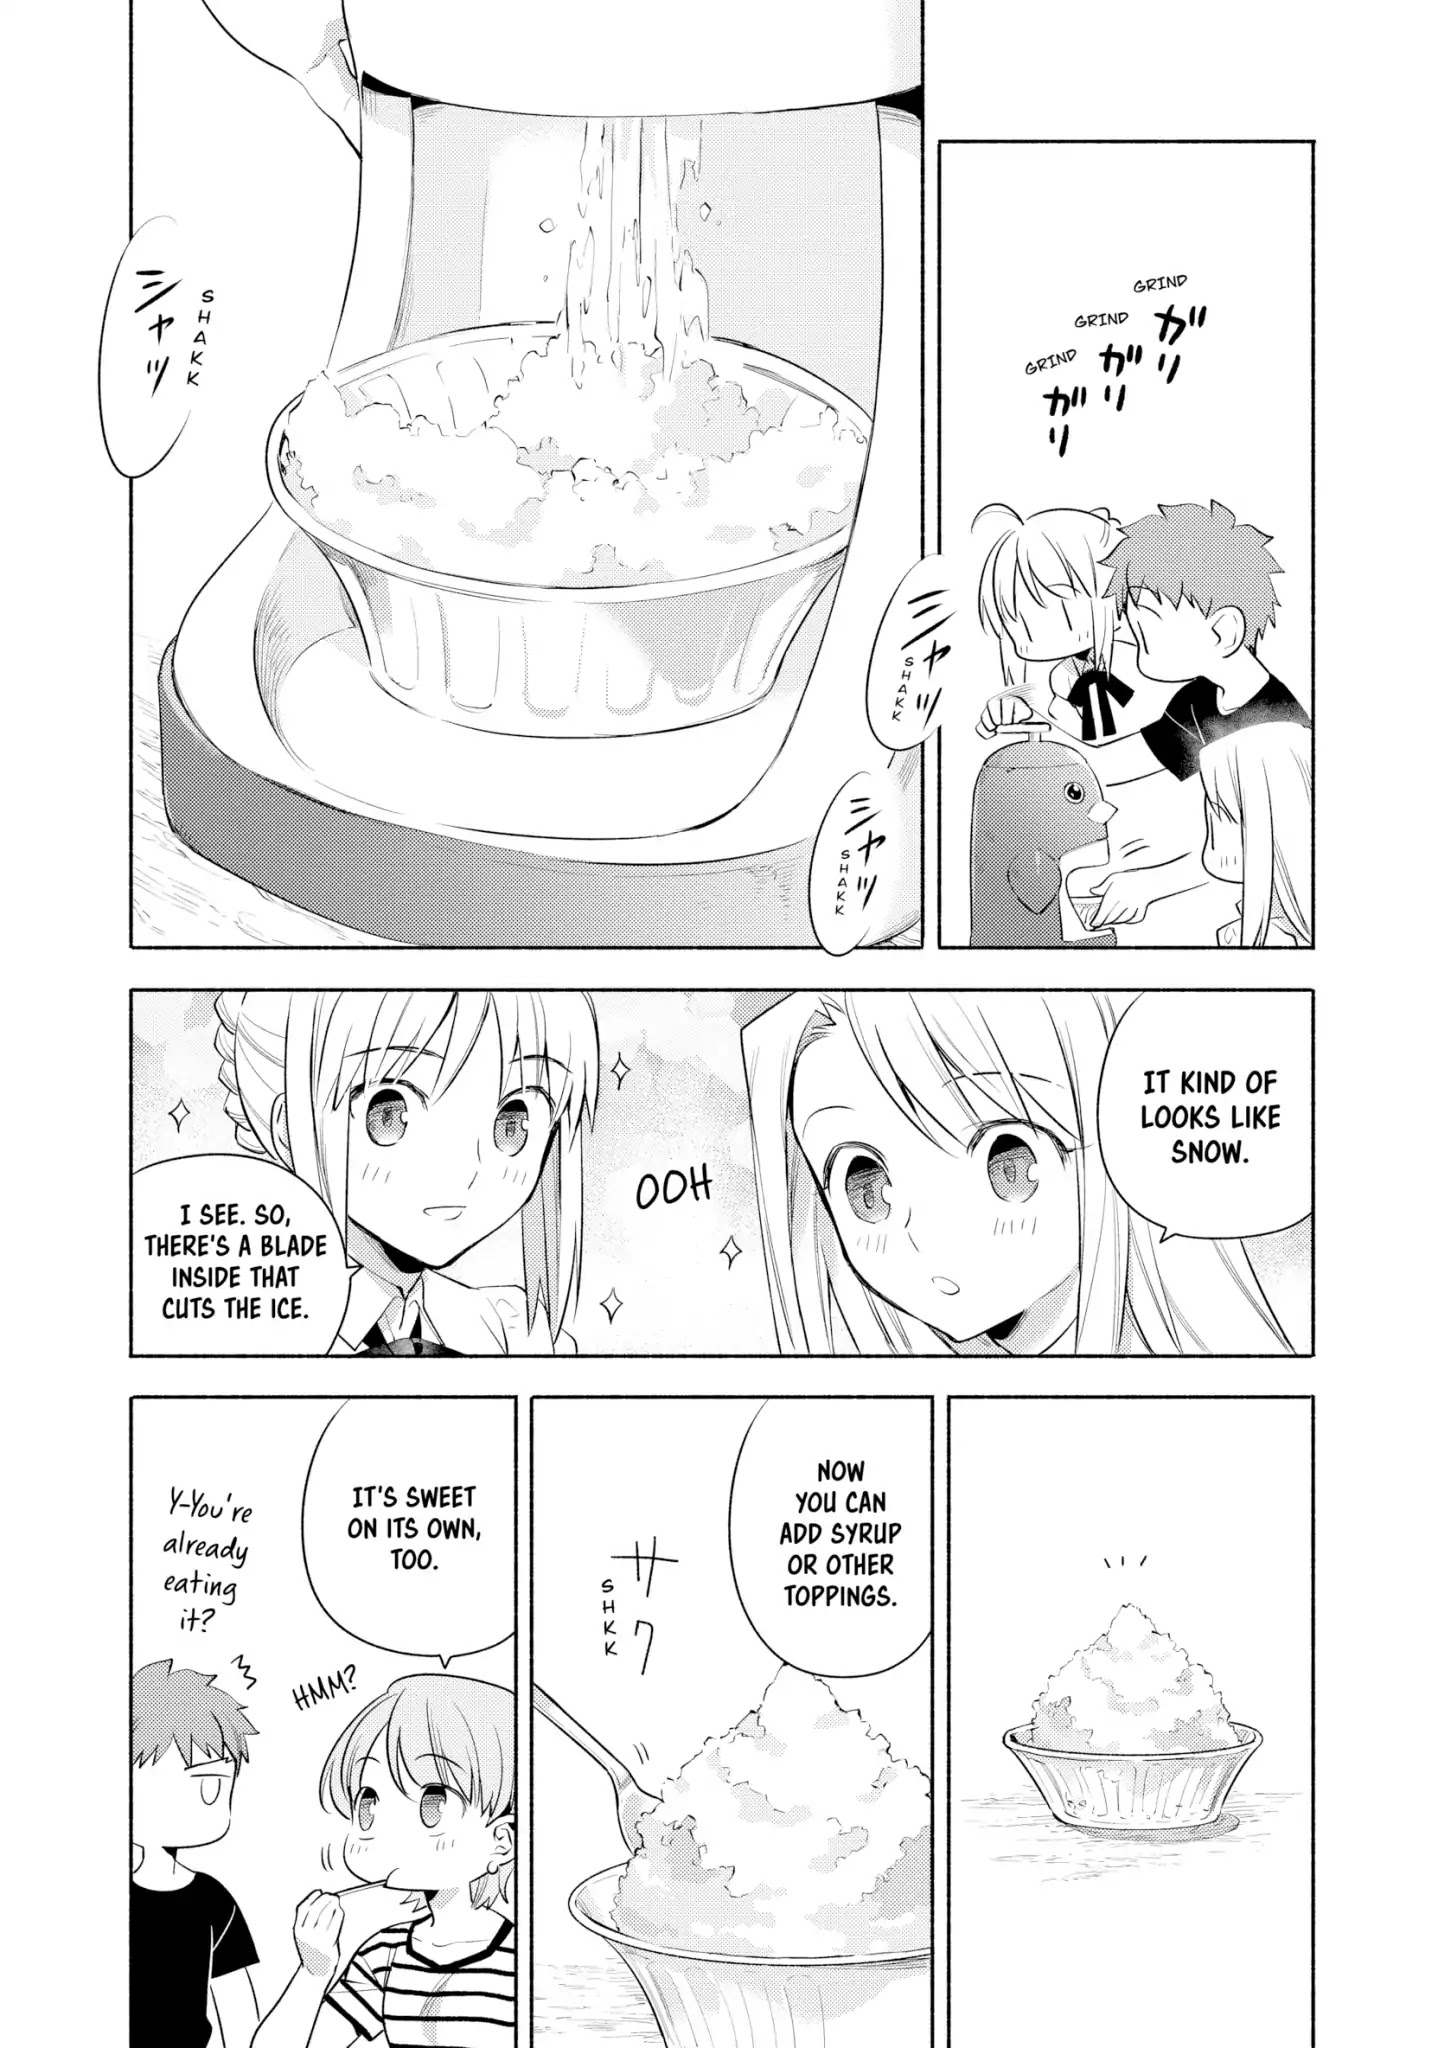 What's Cooking at the Emiya House Today? Chapter 16: Chilly Shaved Ice at Home